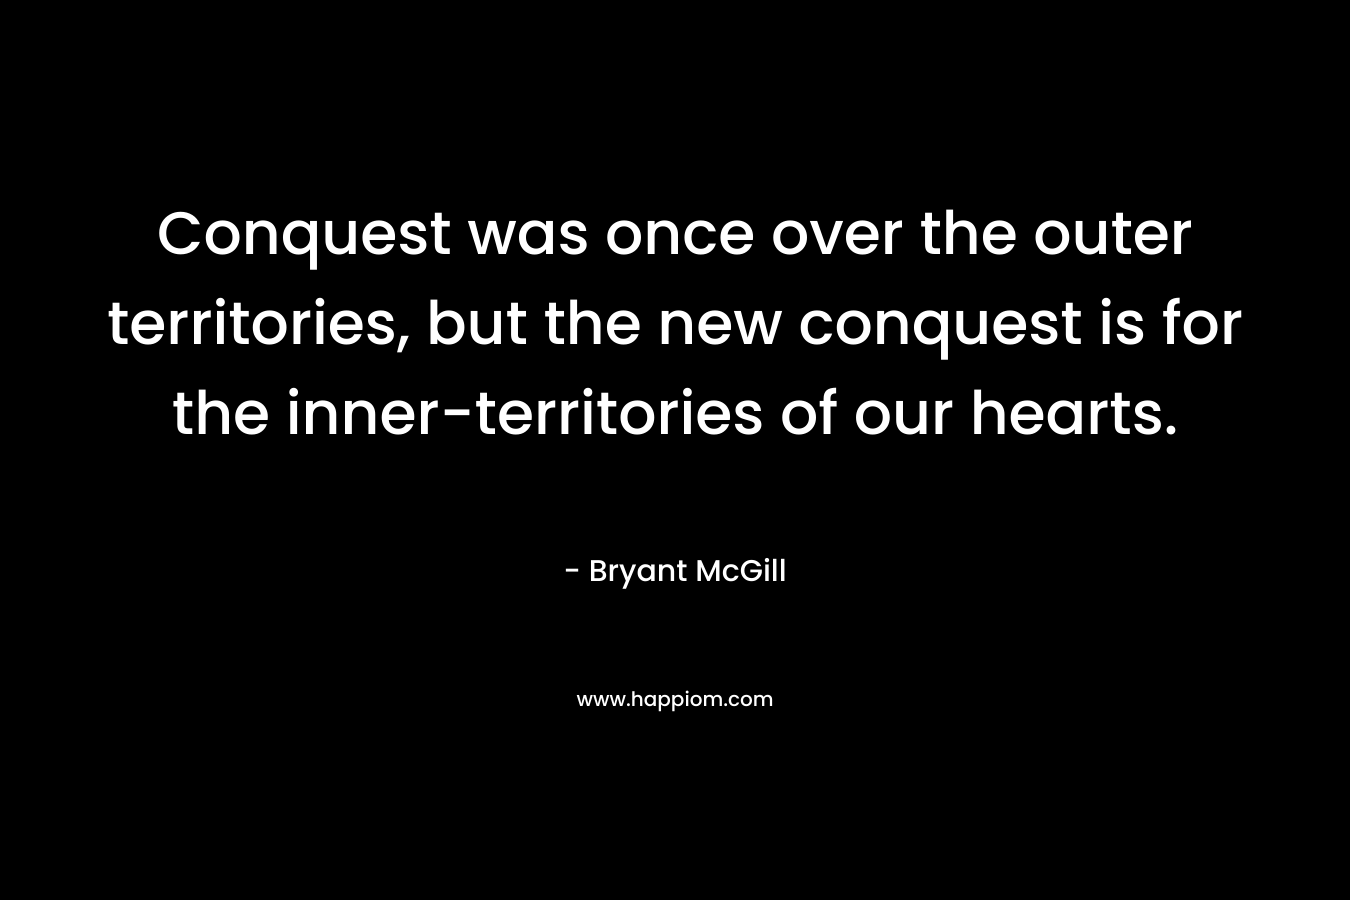 Conquest was once over the outer territories, but the new conquest is for the inner-territories of our hearts.